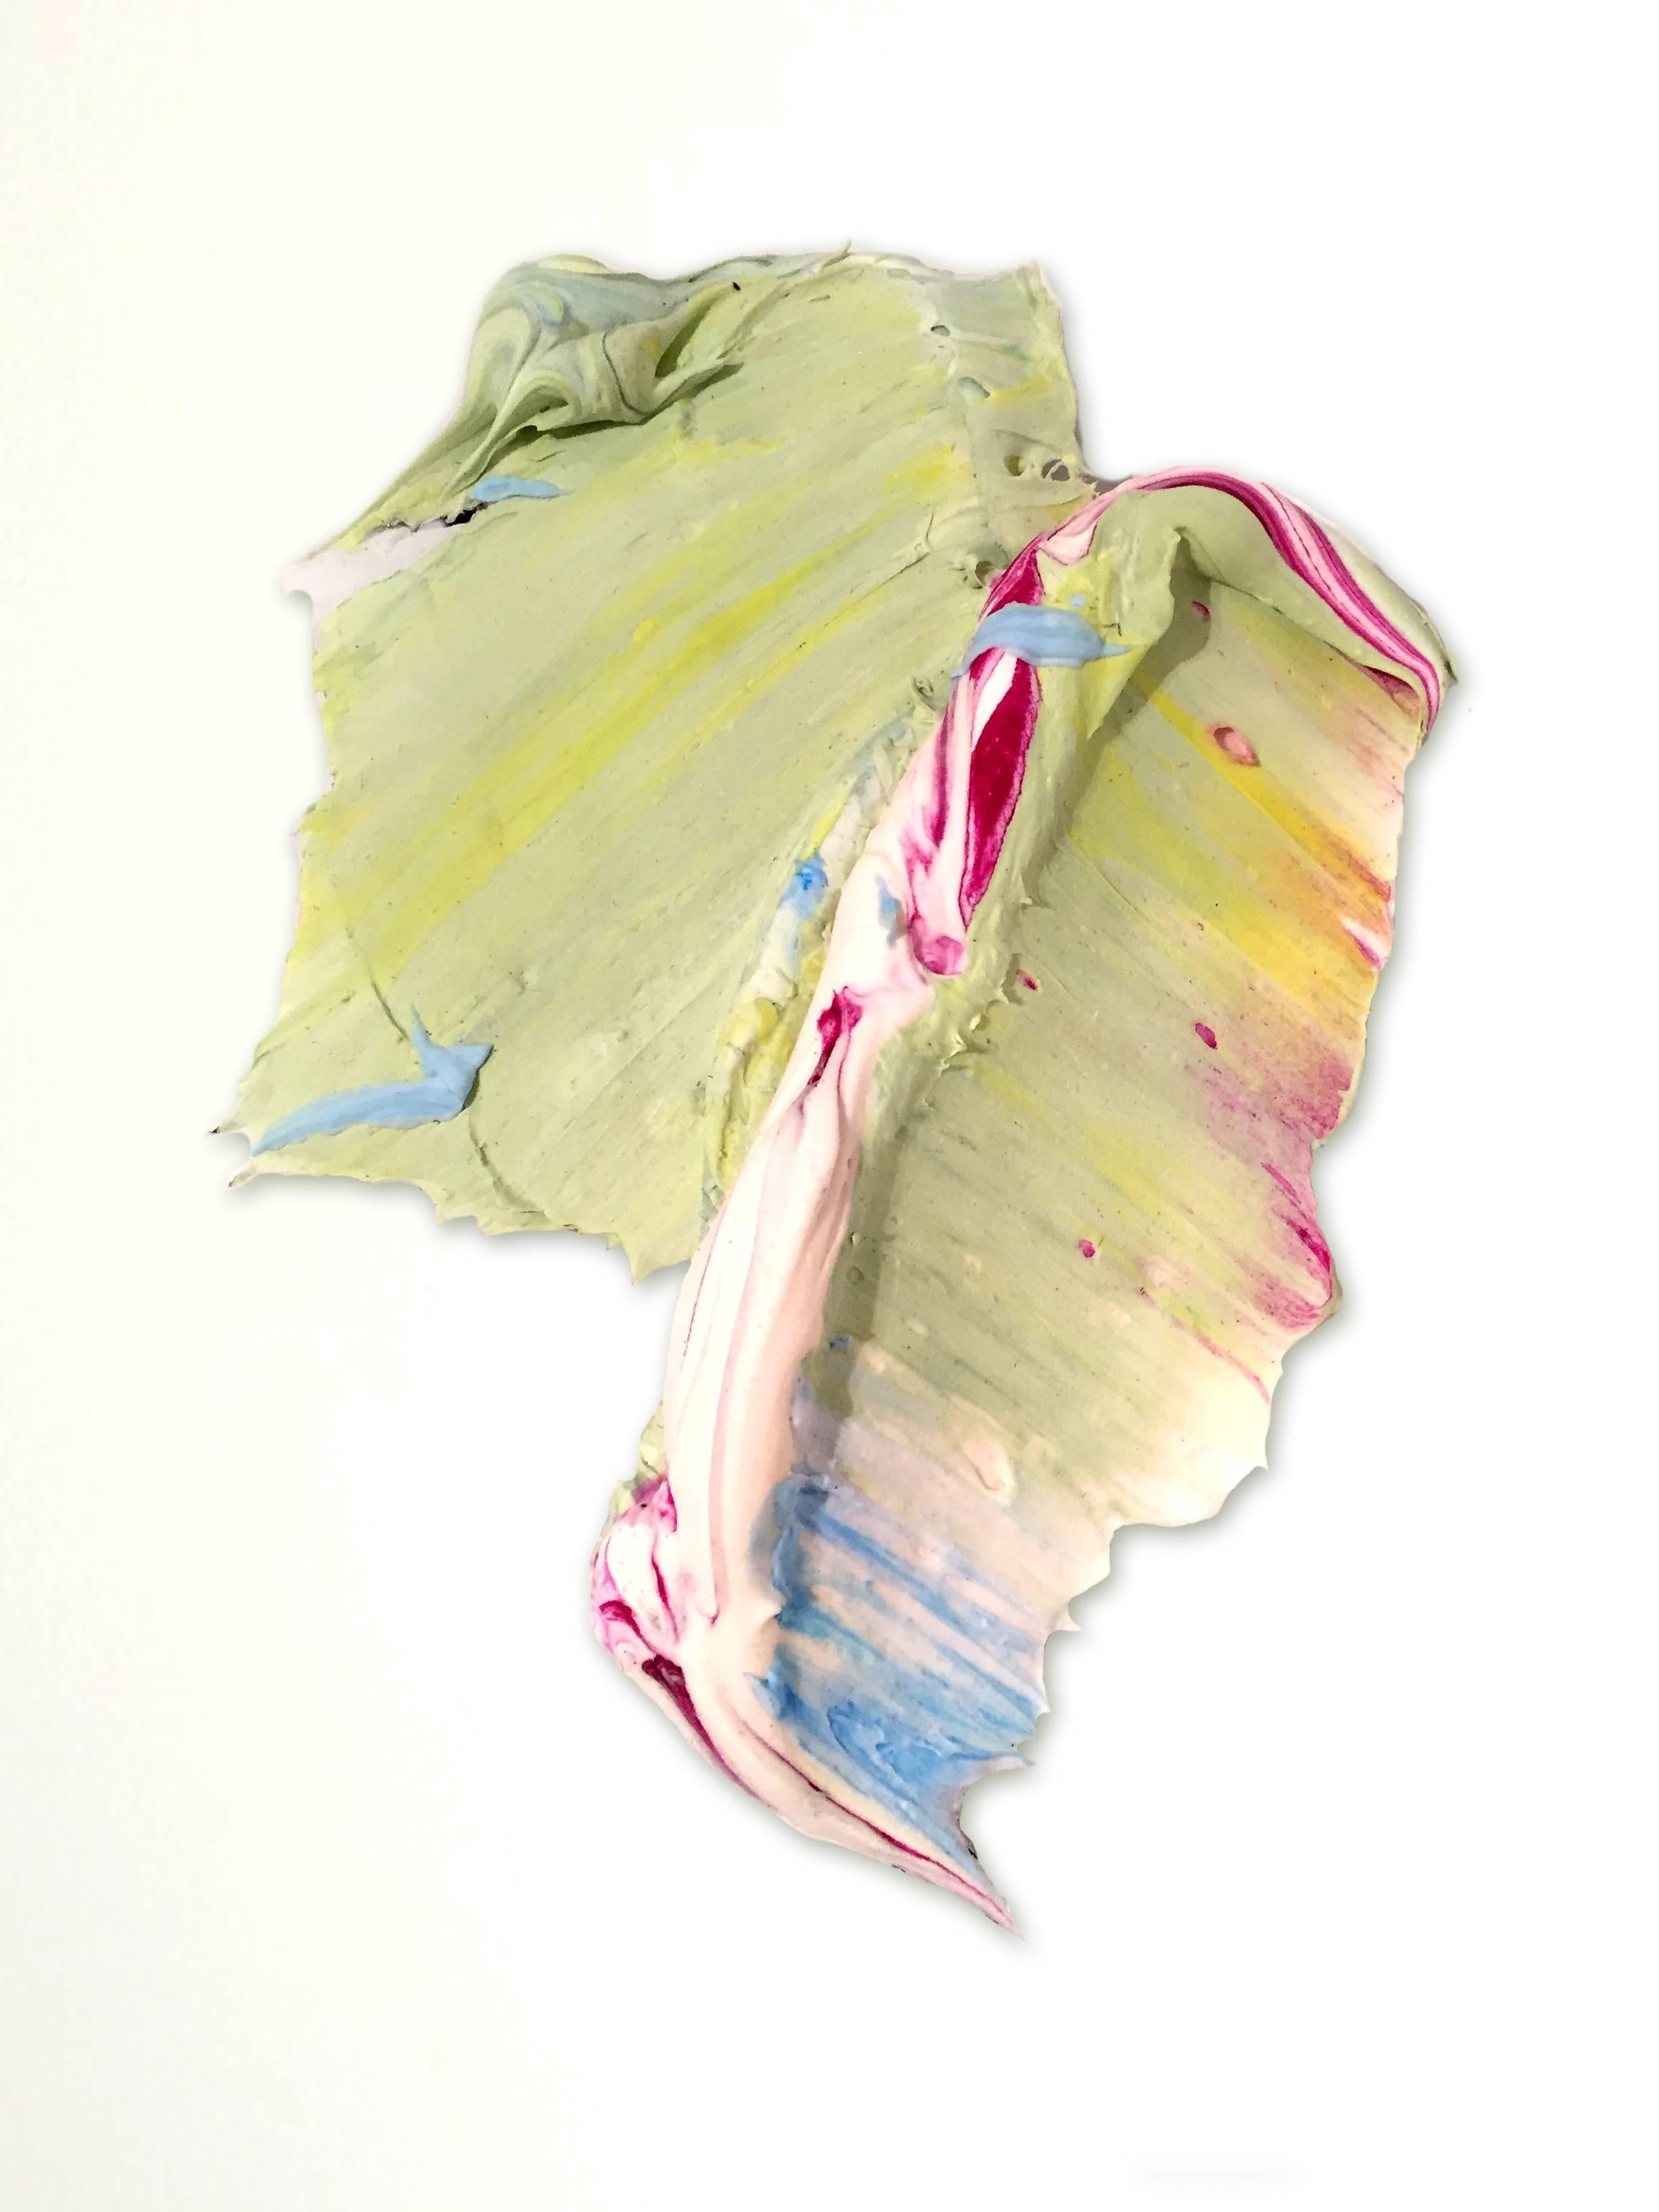 Donald Martiny Abstract Sculpture - Untitled II